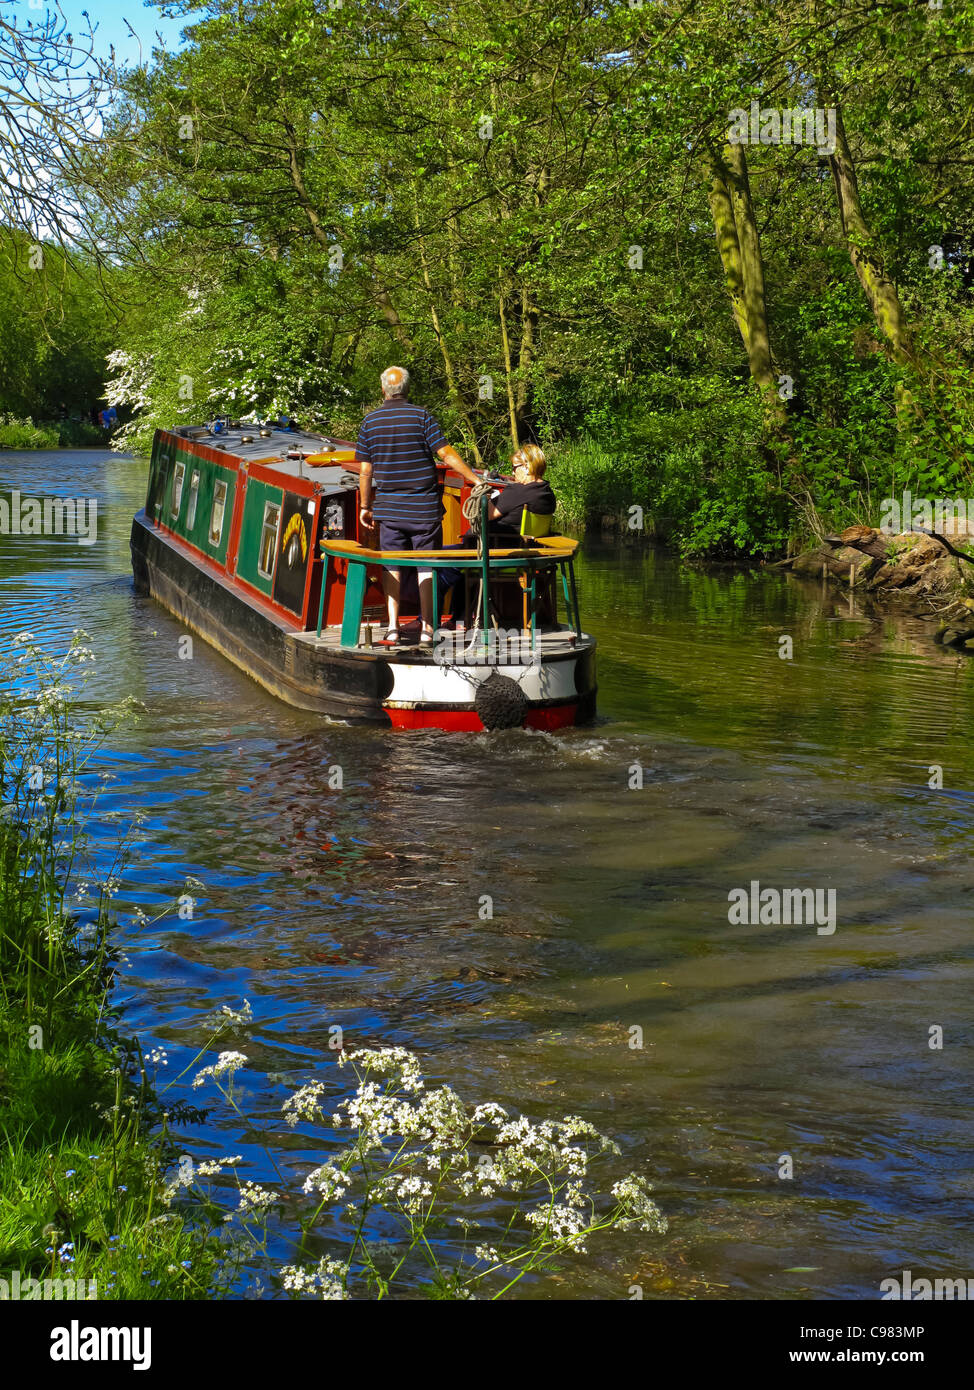 Narrowboat cruising on Staffordshire and Worcestershire Canal in Stafford West Midlands England UK built 1771 by James Brindley Stock Photo